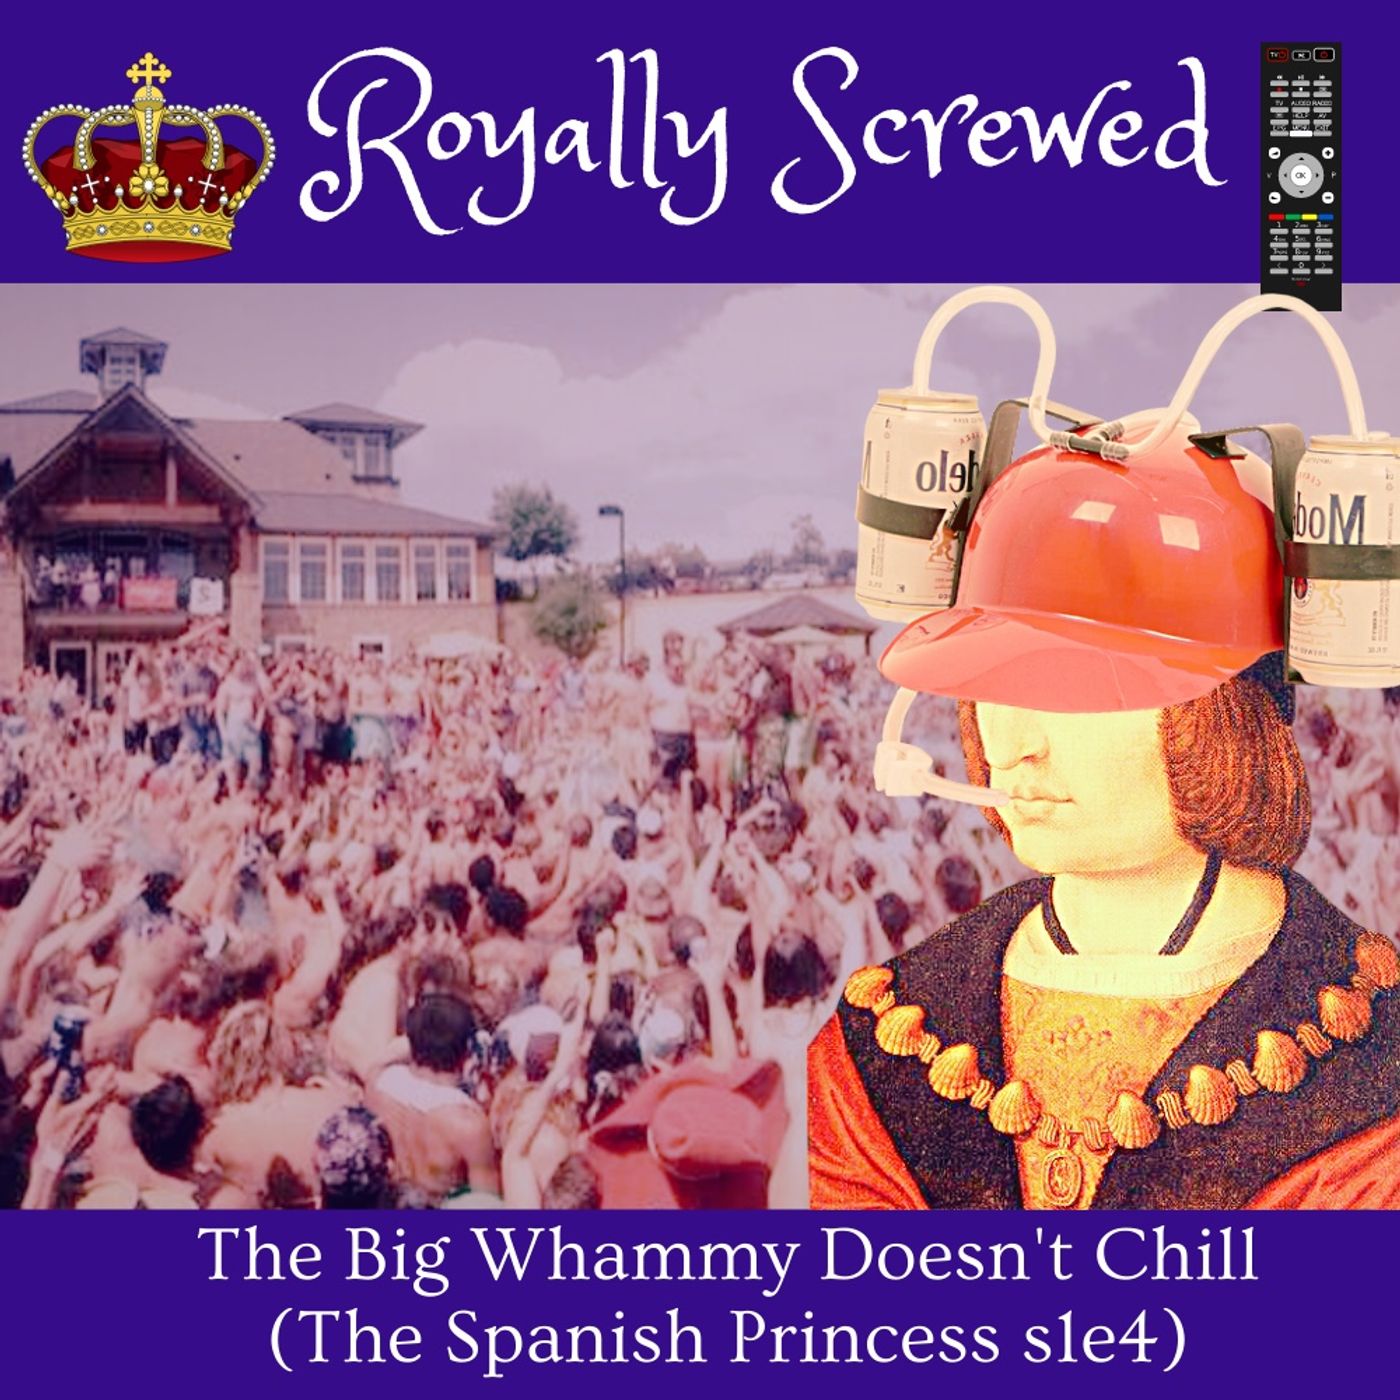 The Big Whammy Doesn’t Chill (The Spanish Princess s1e4)